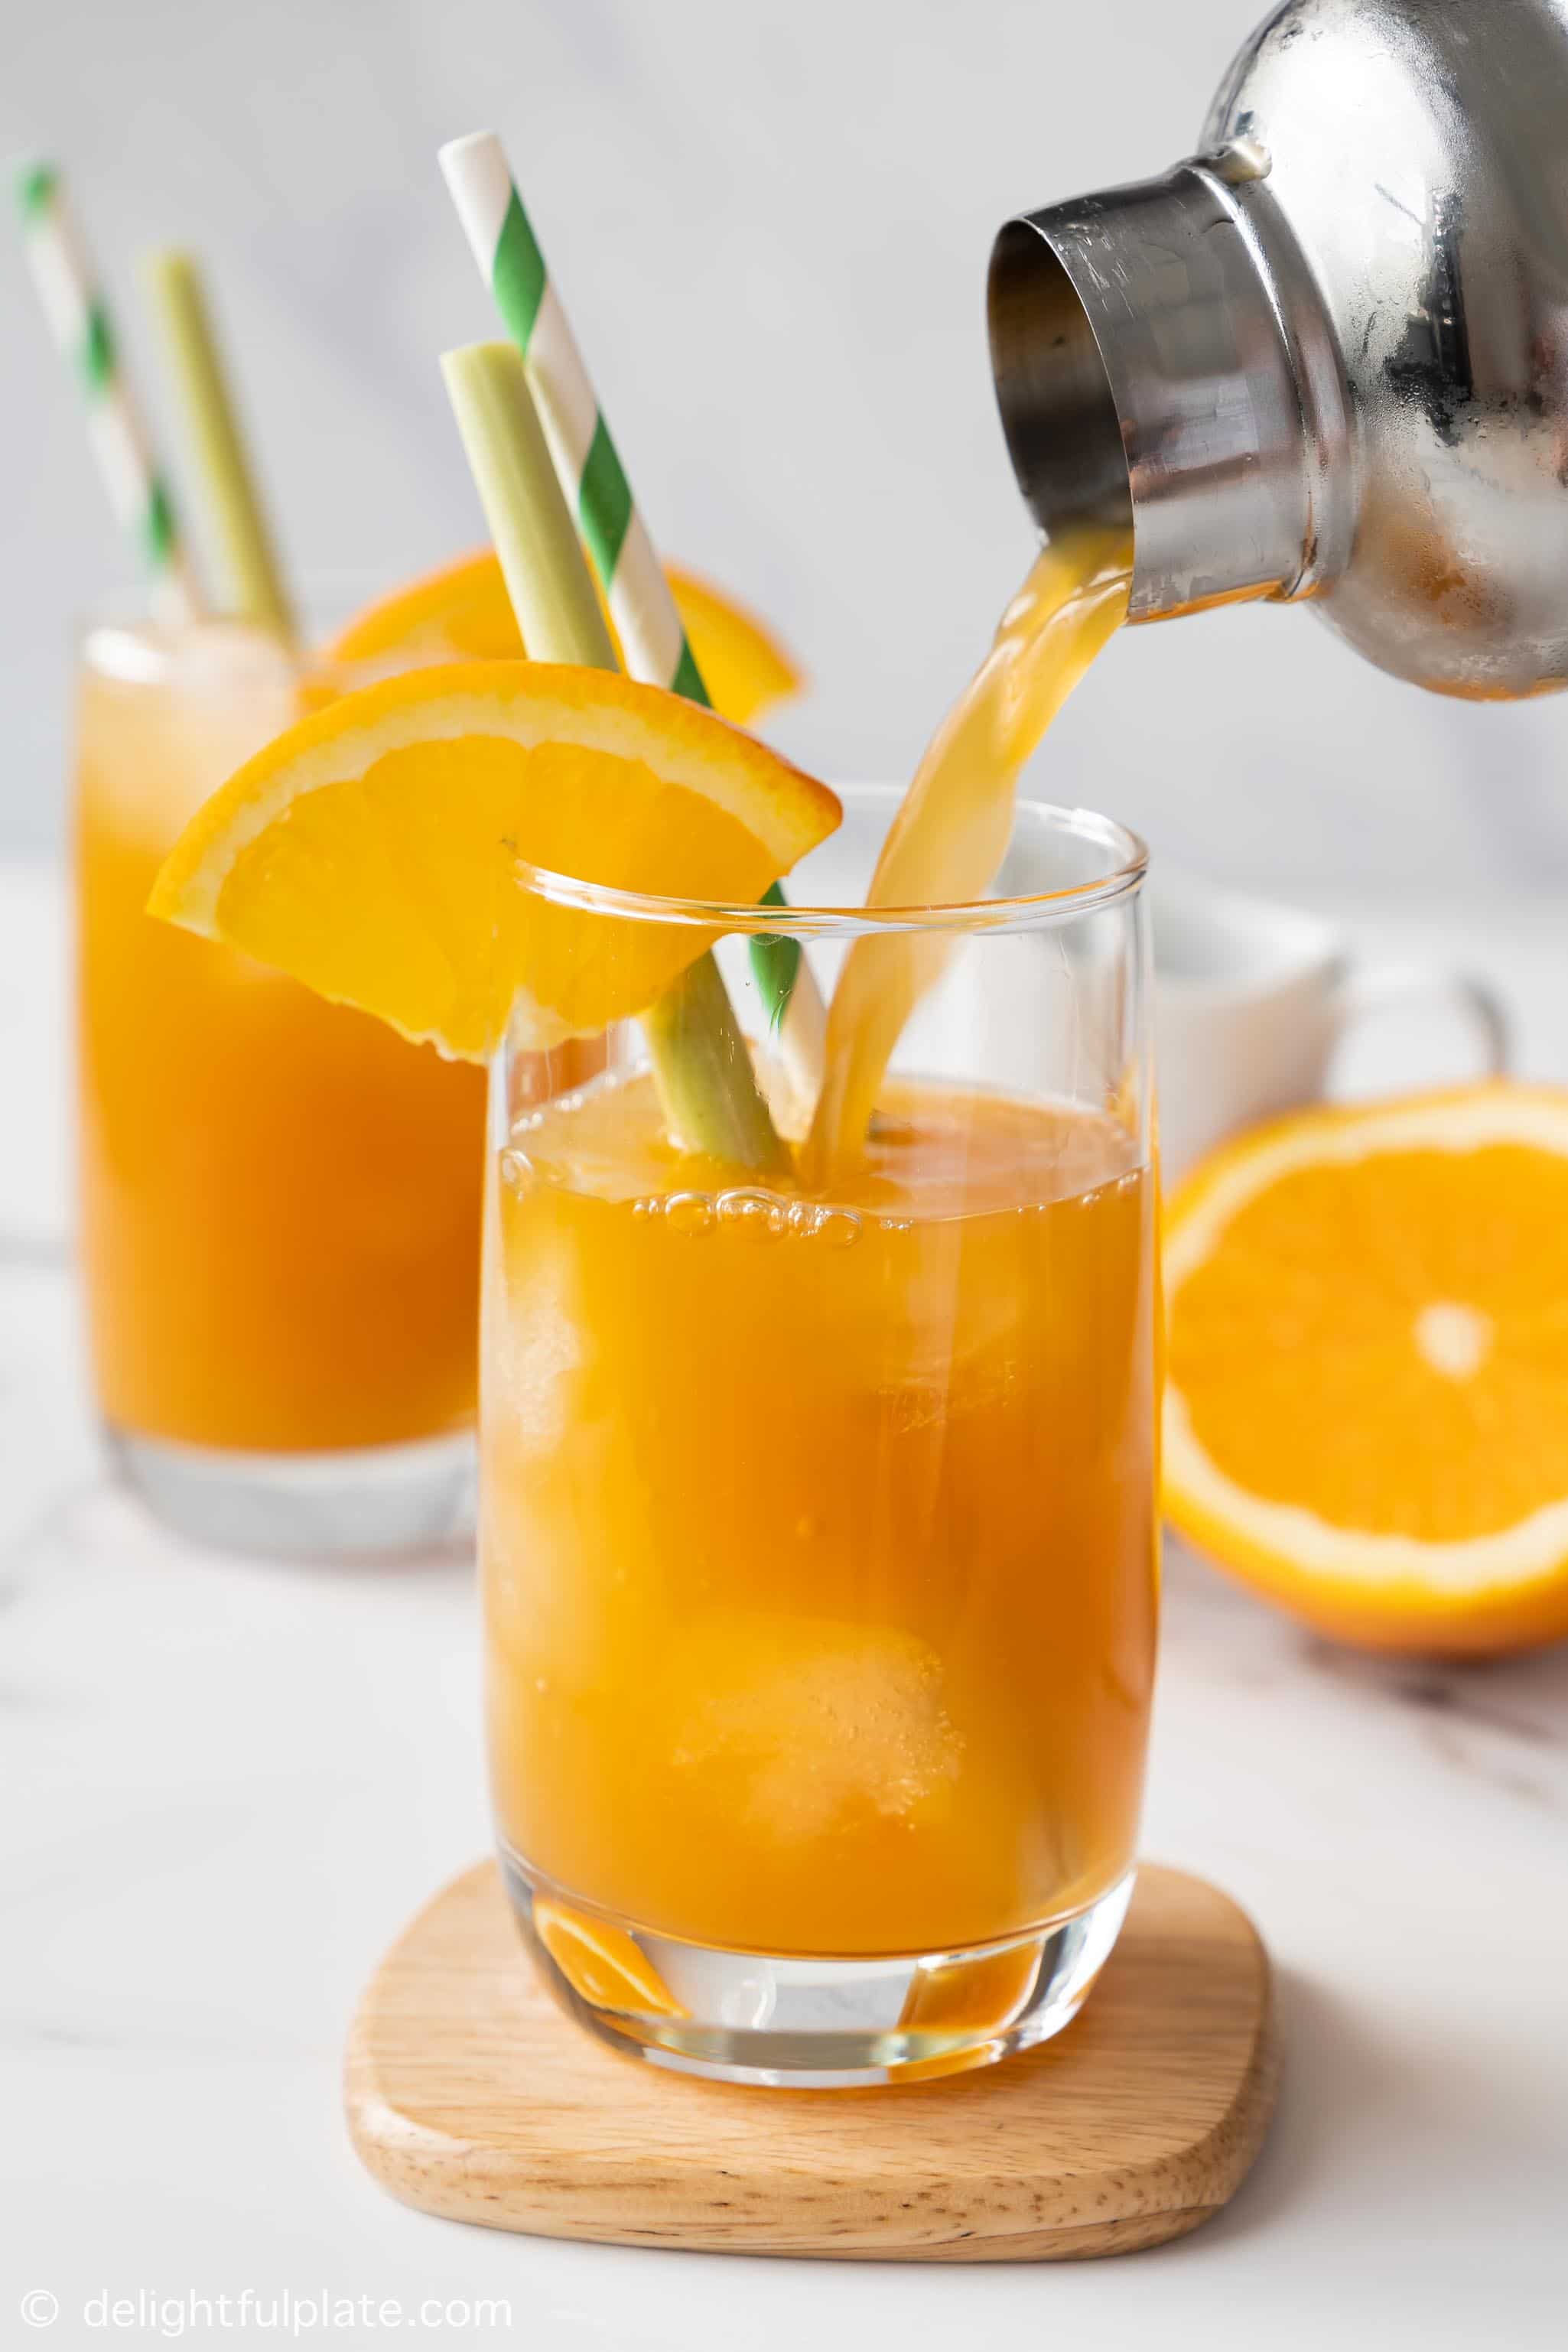 pouring ginger orange tea into a glass filled with ice